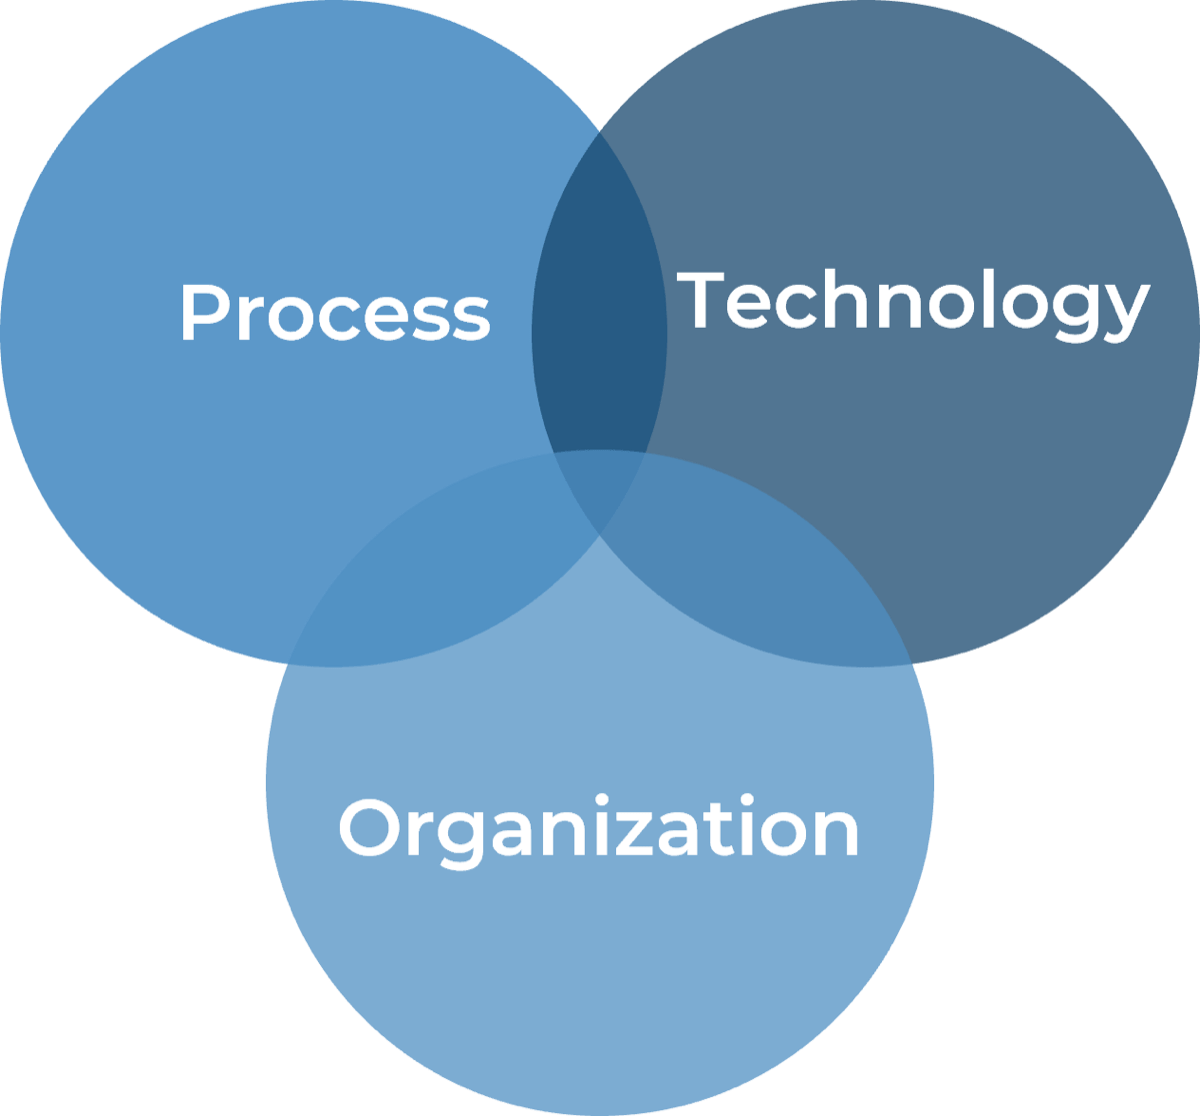 The image contains a Venn Diagram with 3 circles. The circles are labelled as: Process, Technology, and Organization.